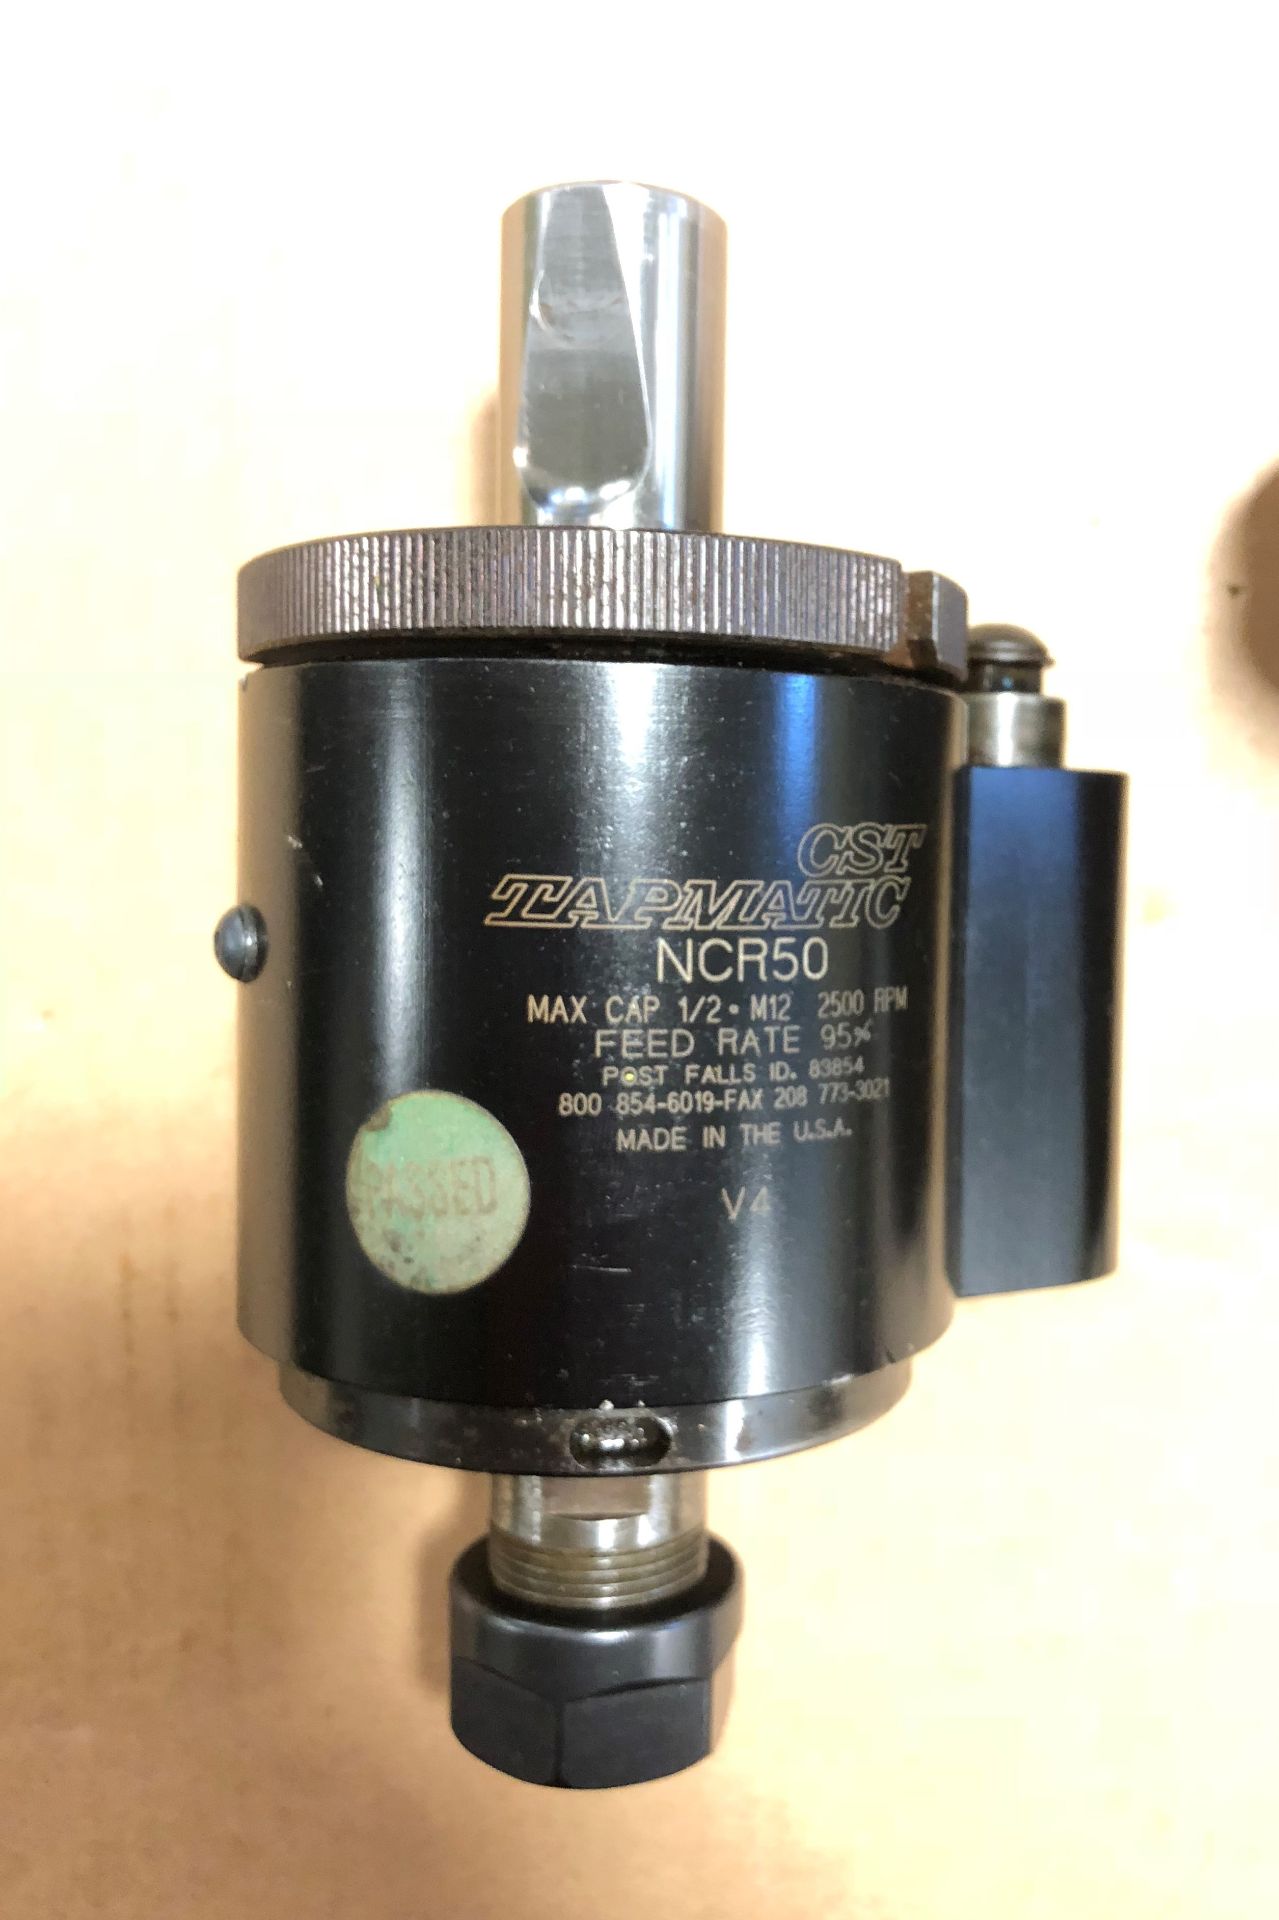 Tapmatic NCR50 Tapping Head Used But in Good Working Condition - Bild 2 aus 8